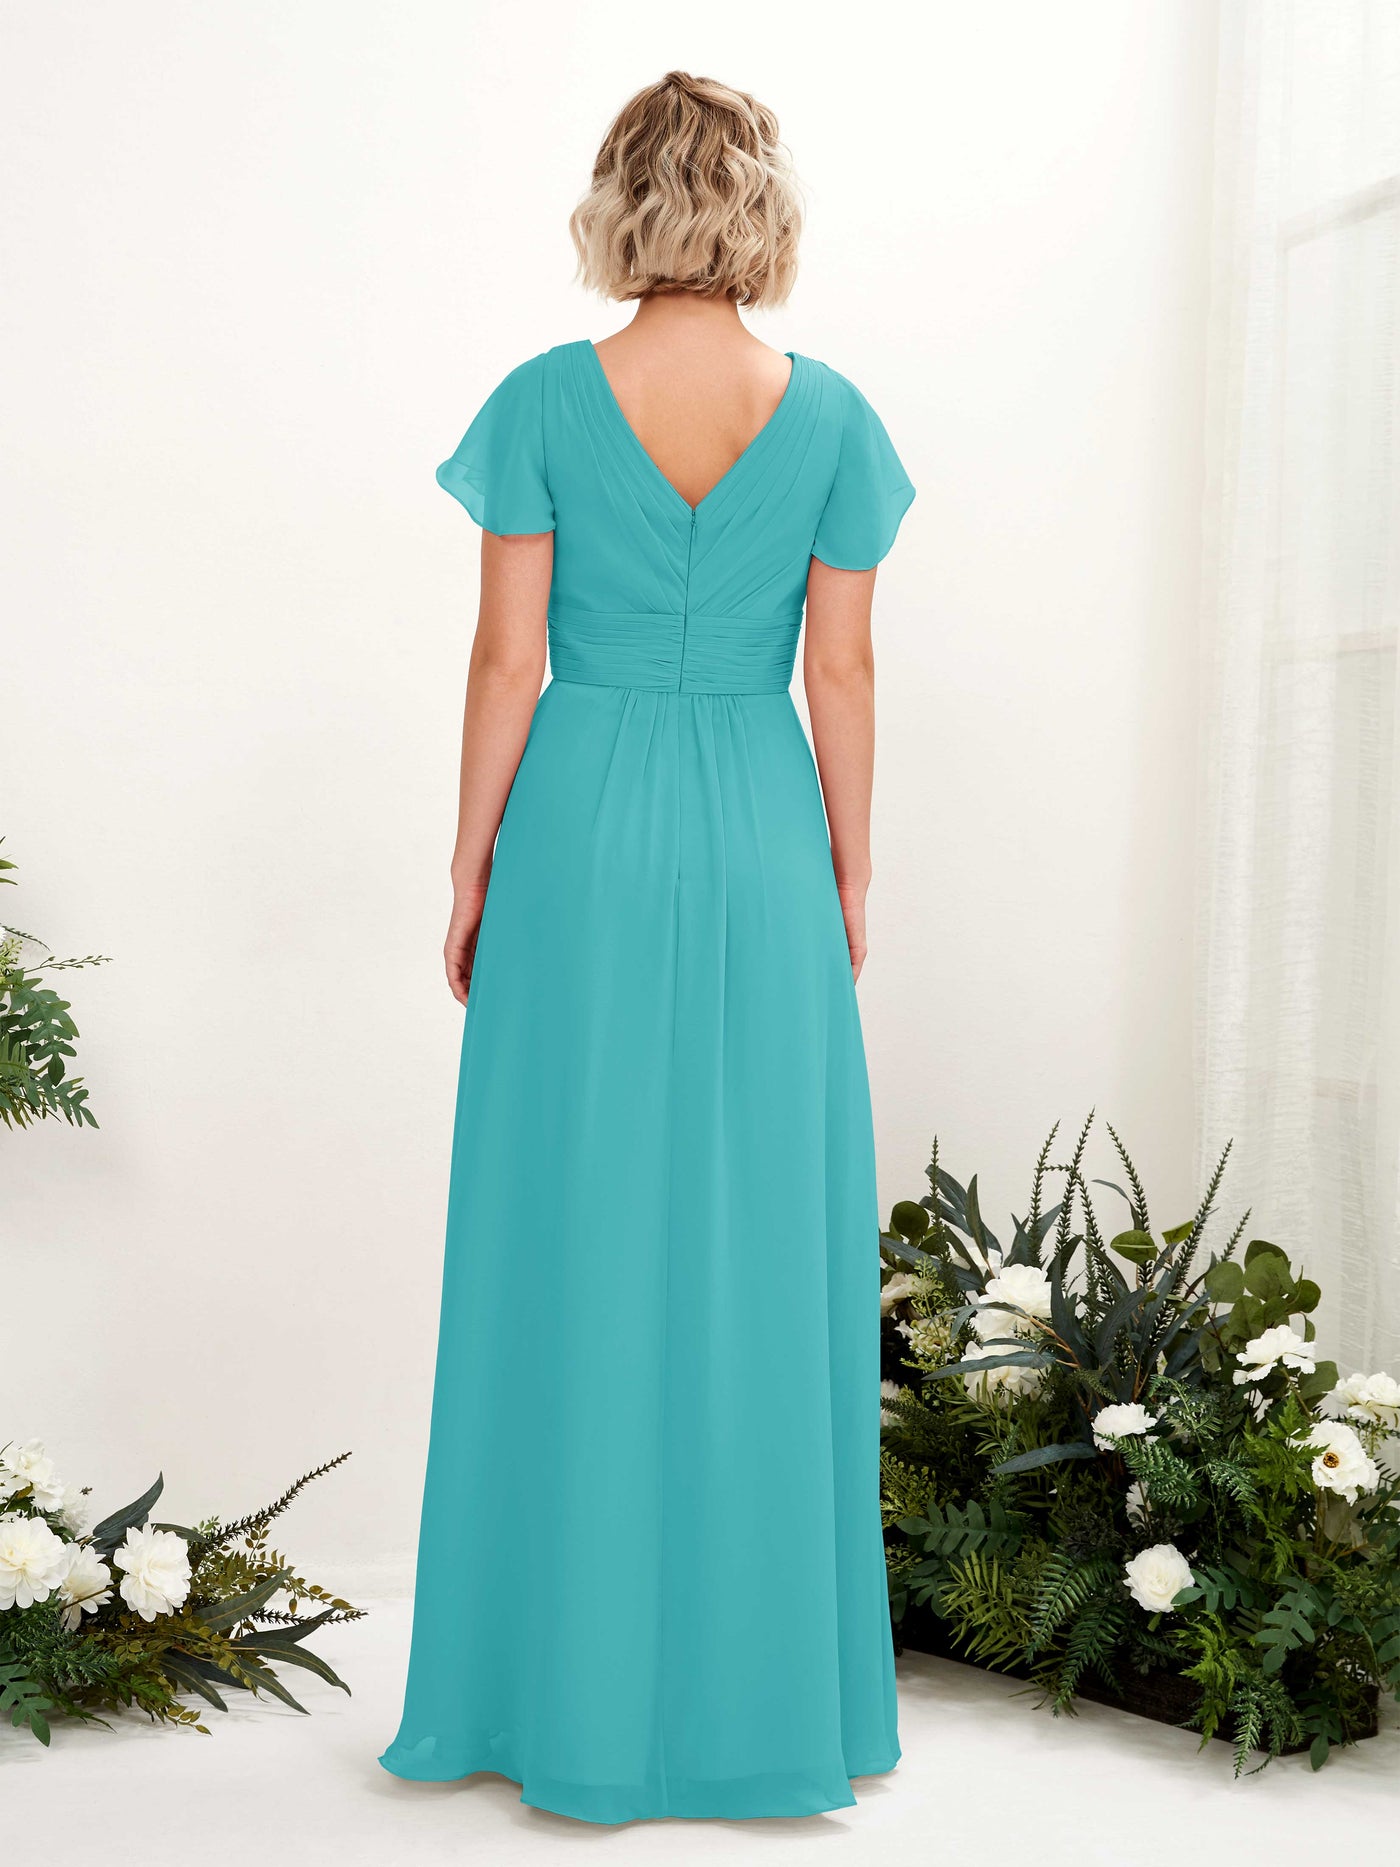 Turquoise Bridesmaid Dresses Bridesmaid Dress A-line Chiffon V-neck Full Length Short Sleeves Wedding Party Dress (81224323)#color_turquoise